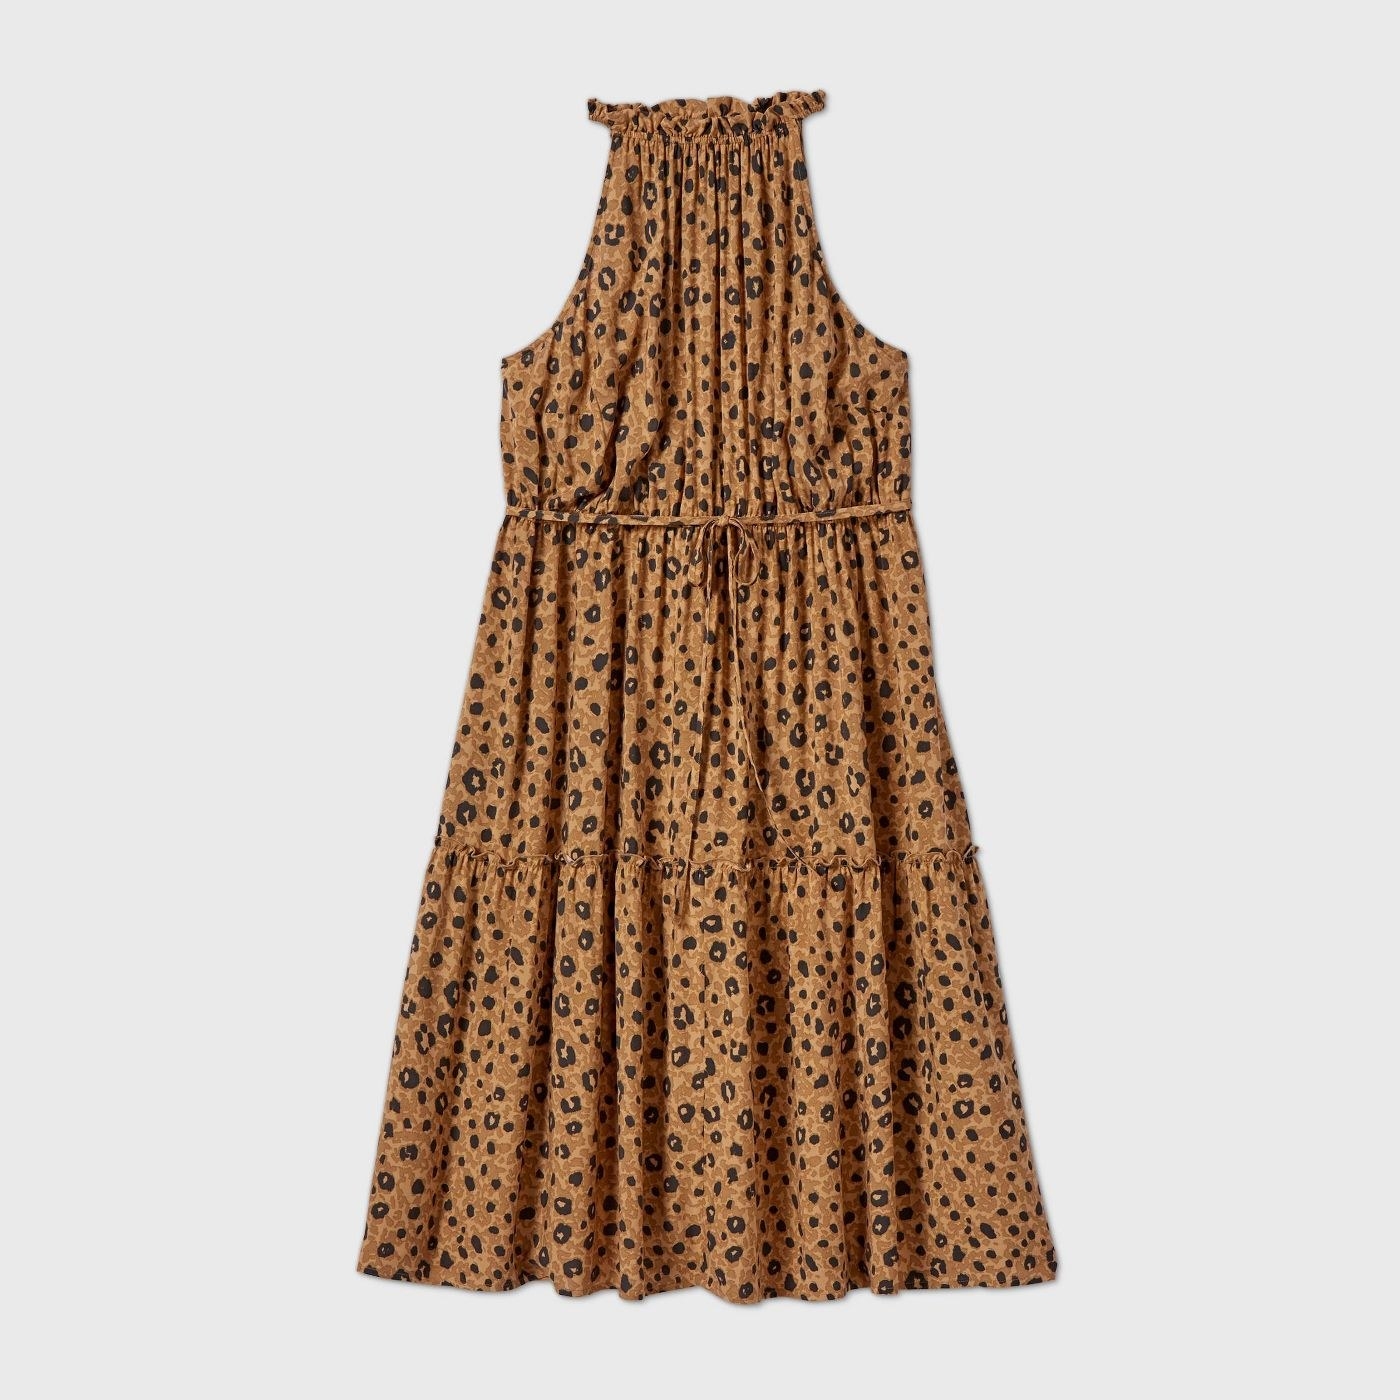 leopard print tiered dress with tie string at waist 